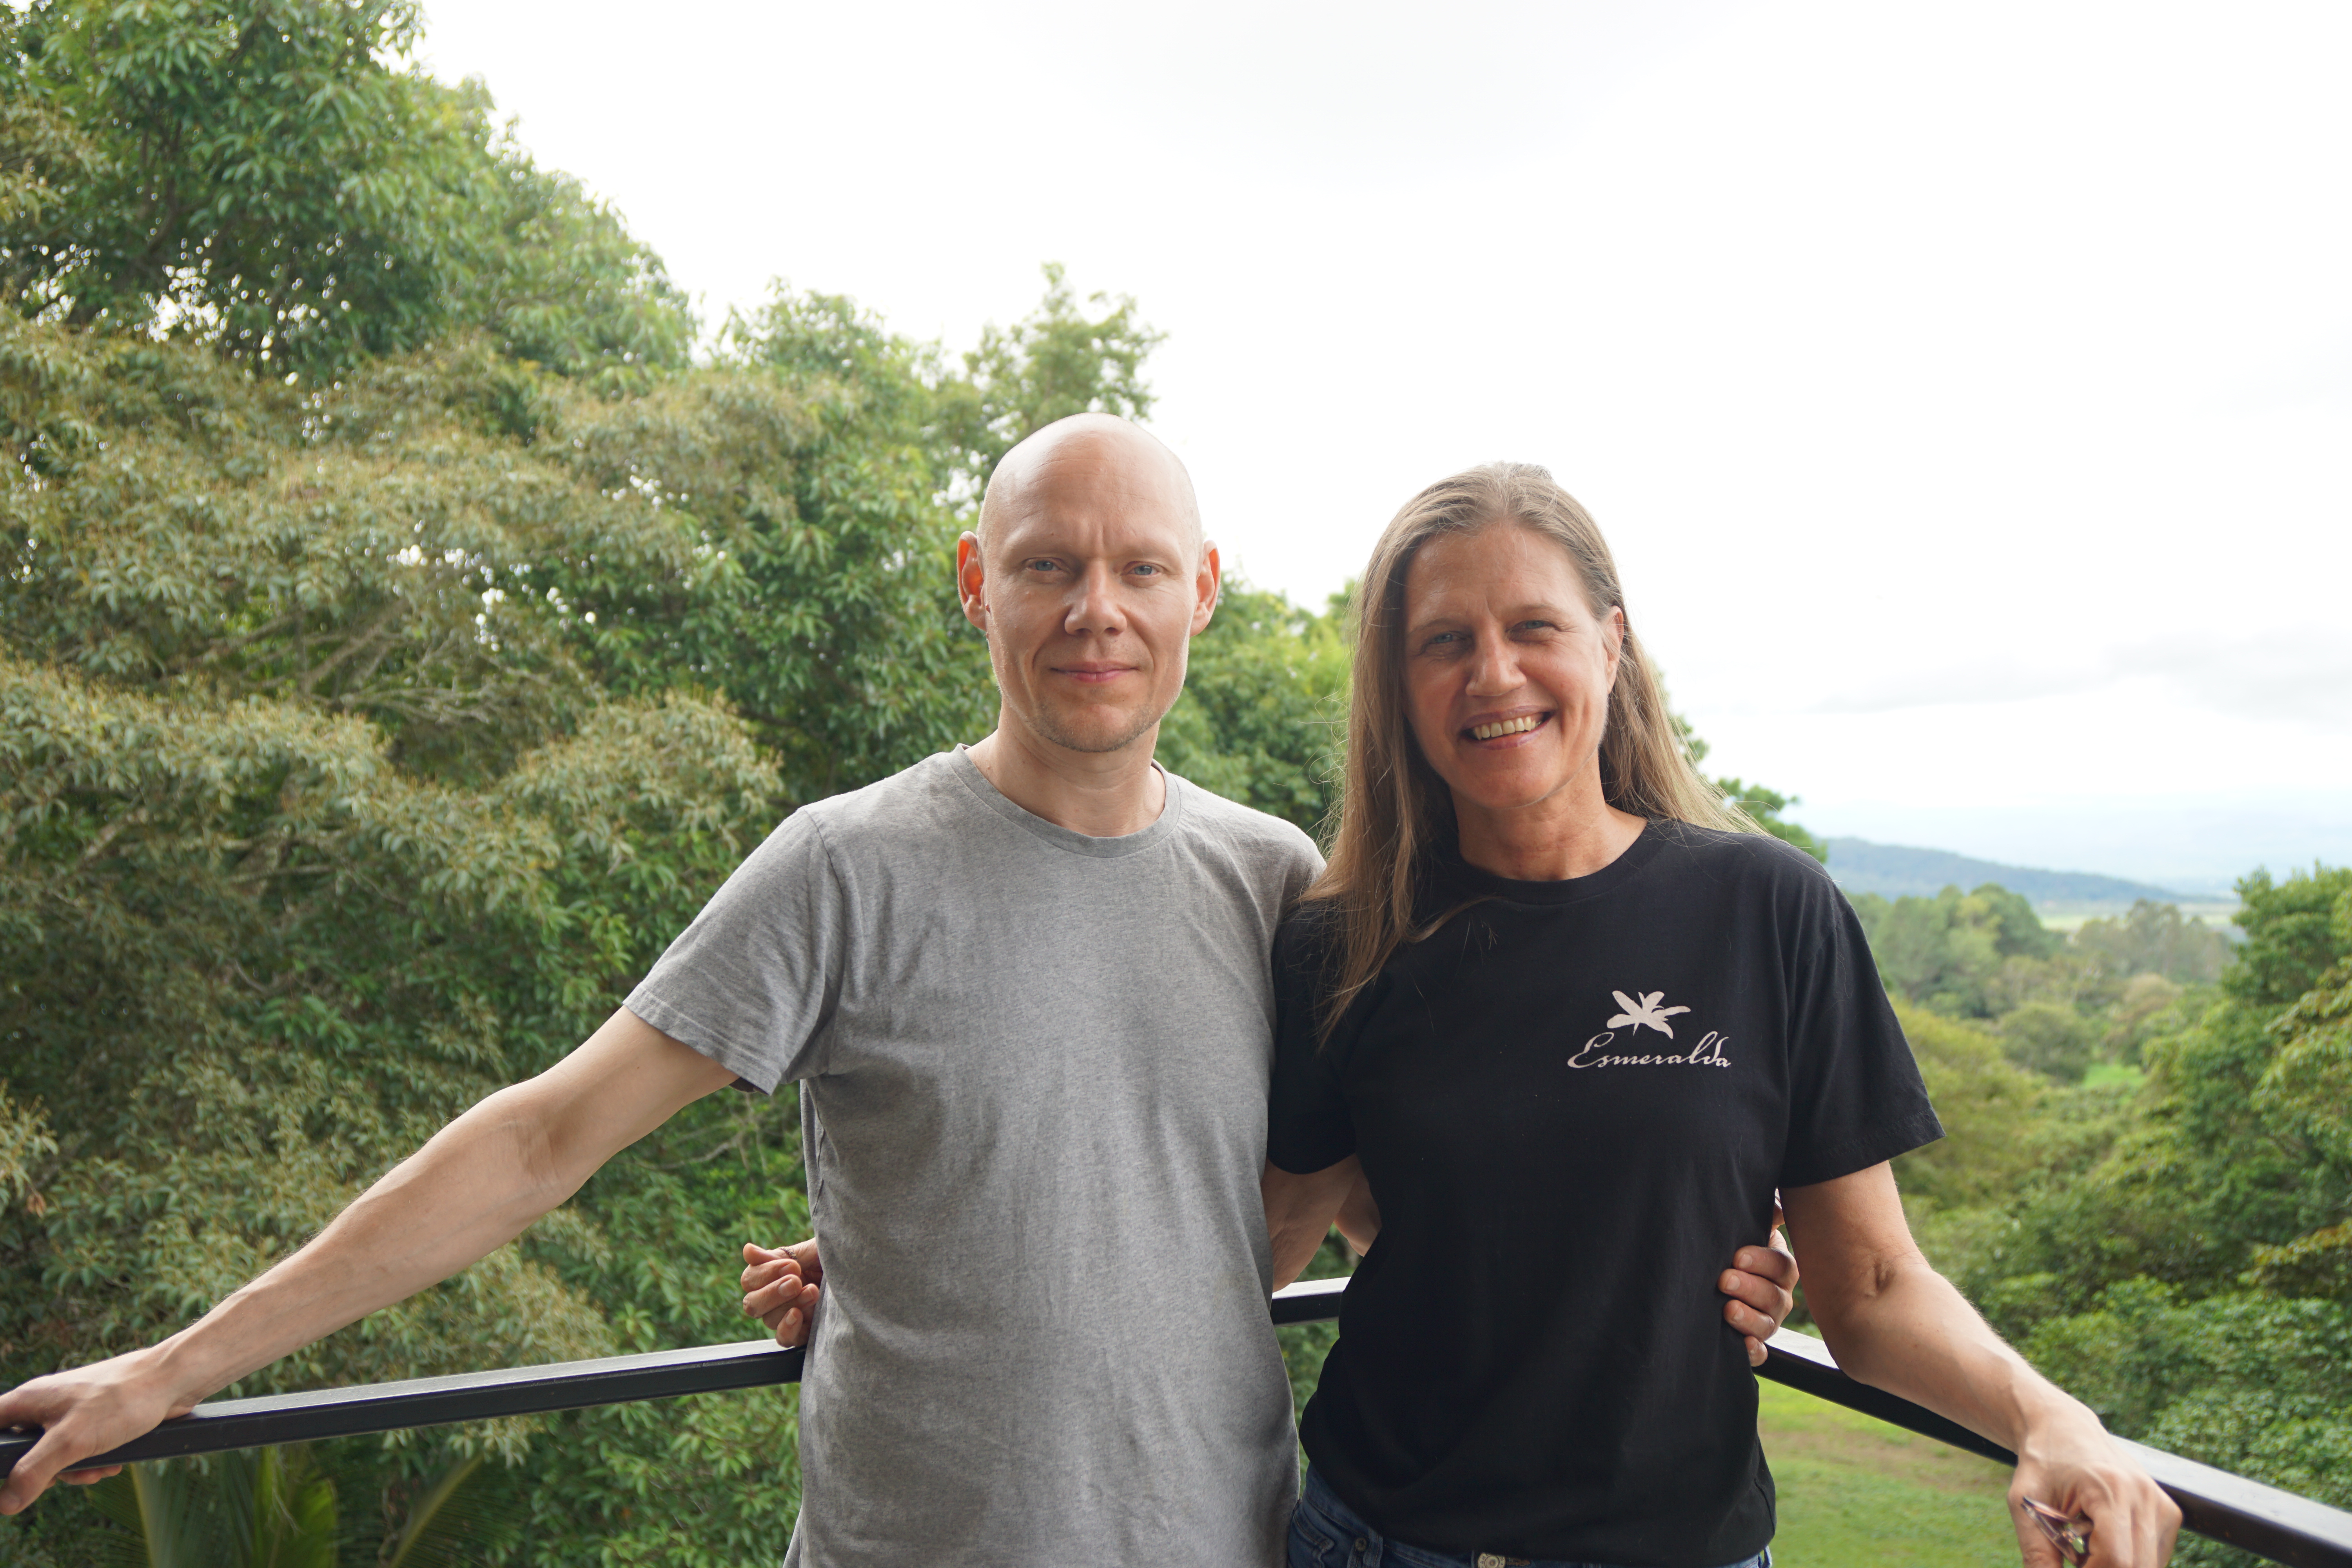 Samuli and Rachel at the balcony overlooking their land